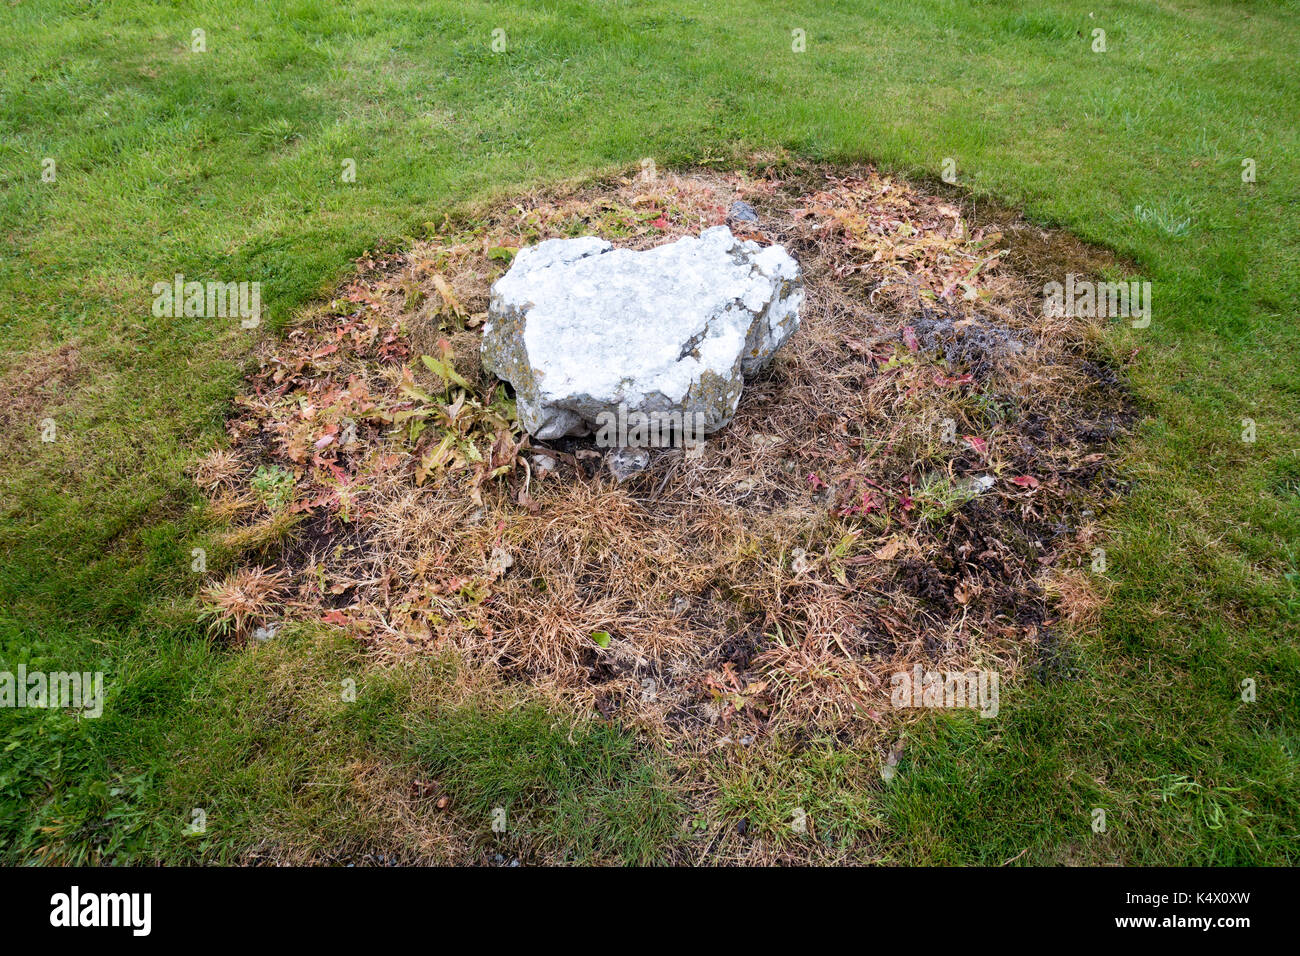 Dead grass around a limestone rock killed by spraying weed killer around the stone along a communal path in Flintshire, Wales Stock Photo